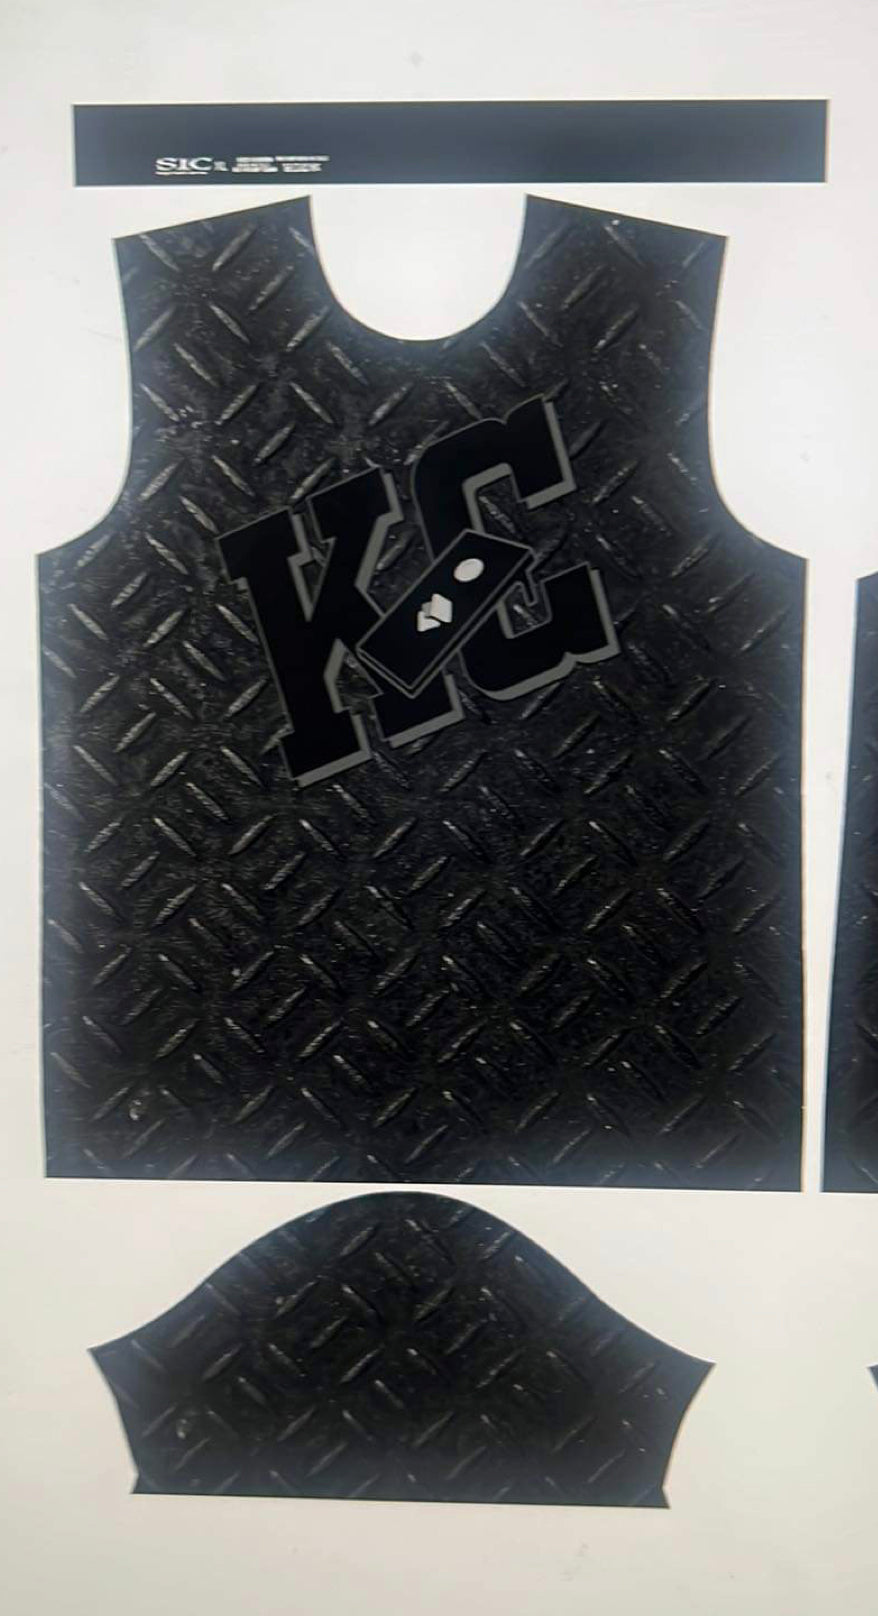 KC Ghosted/diamond plate Jersey. - not a tank top